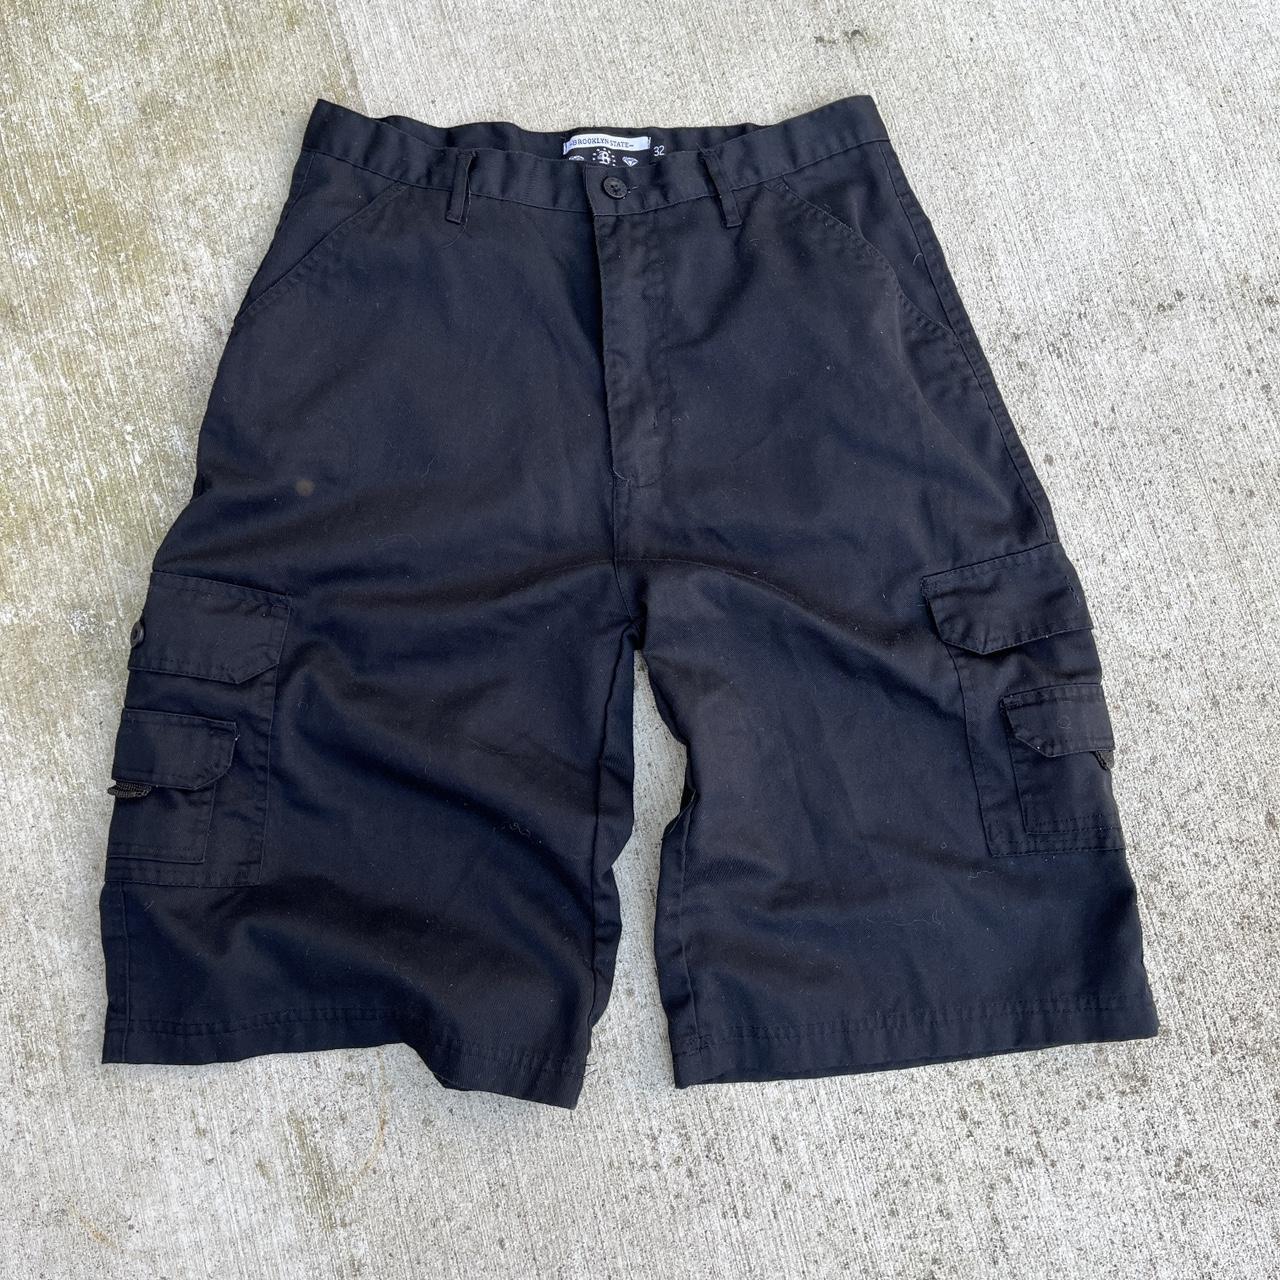 Brooklyn State Baggy Cargo Shorts Size 32 (fits in... - Depop